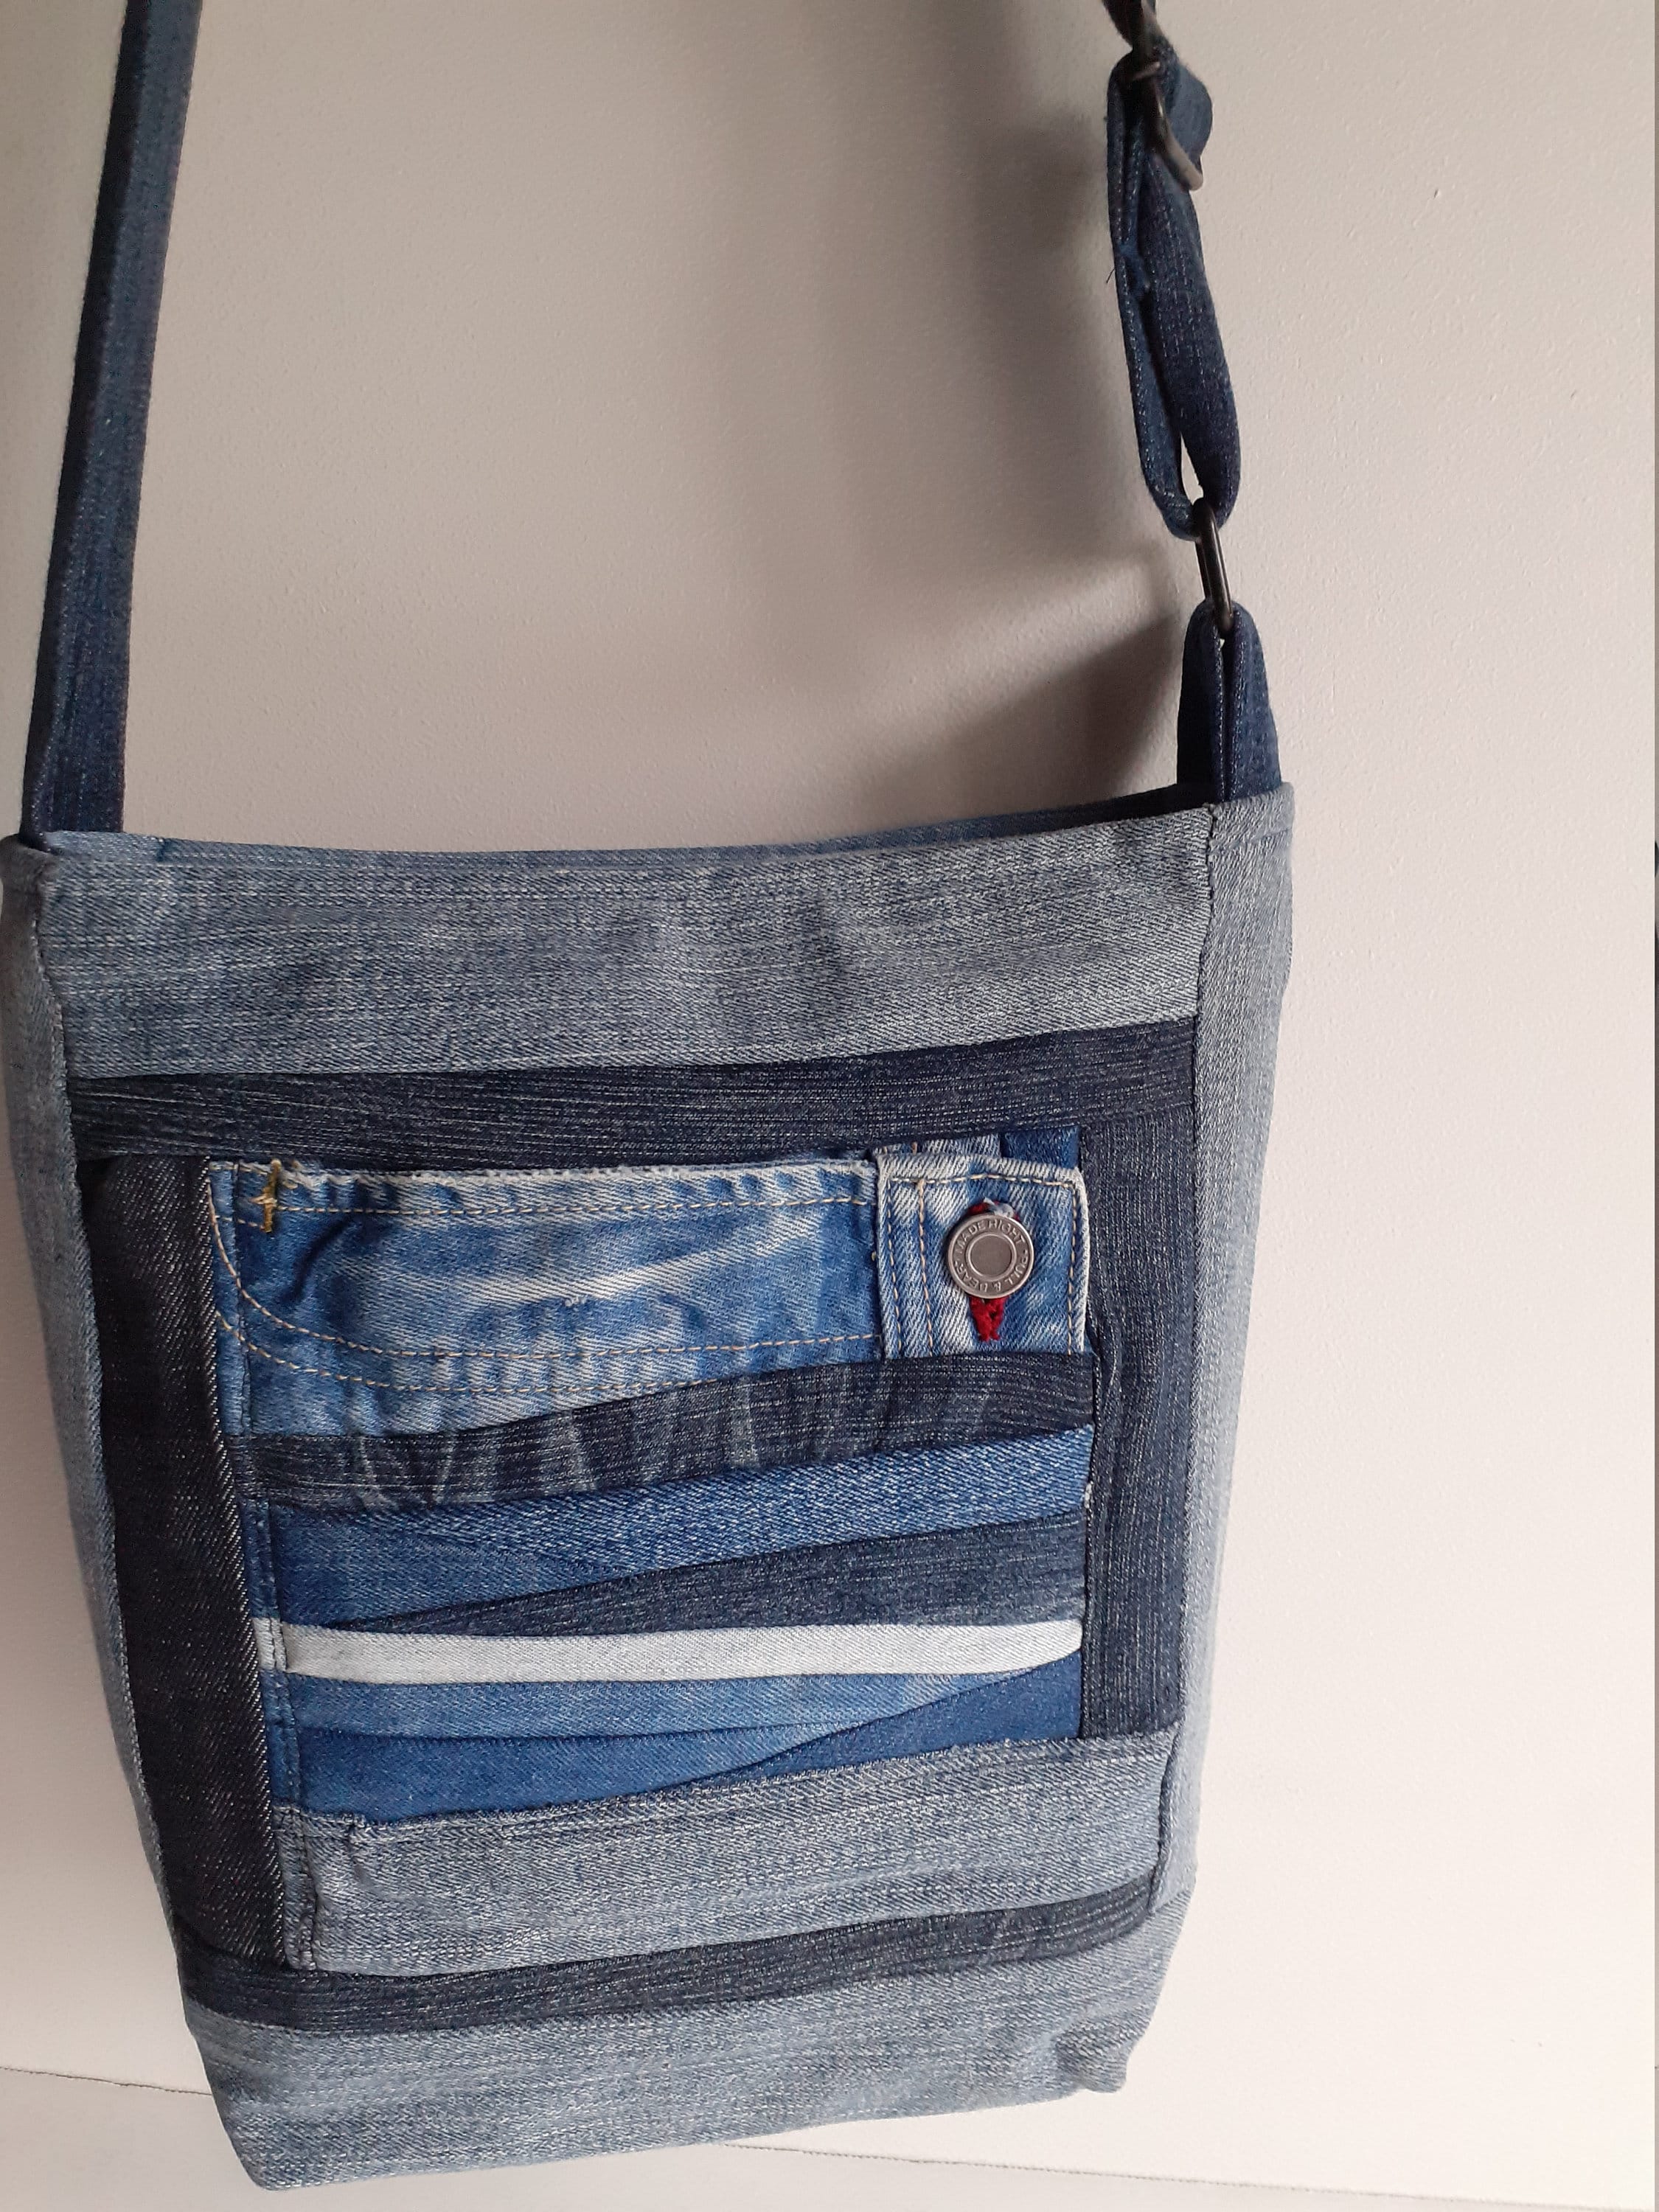 Bags by Diane - Handmade & 100% Recycled Material